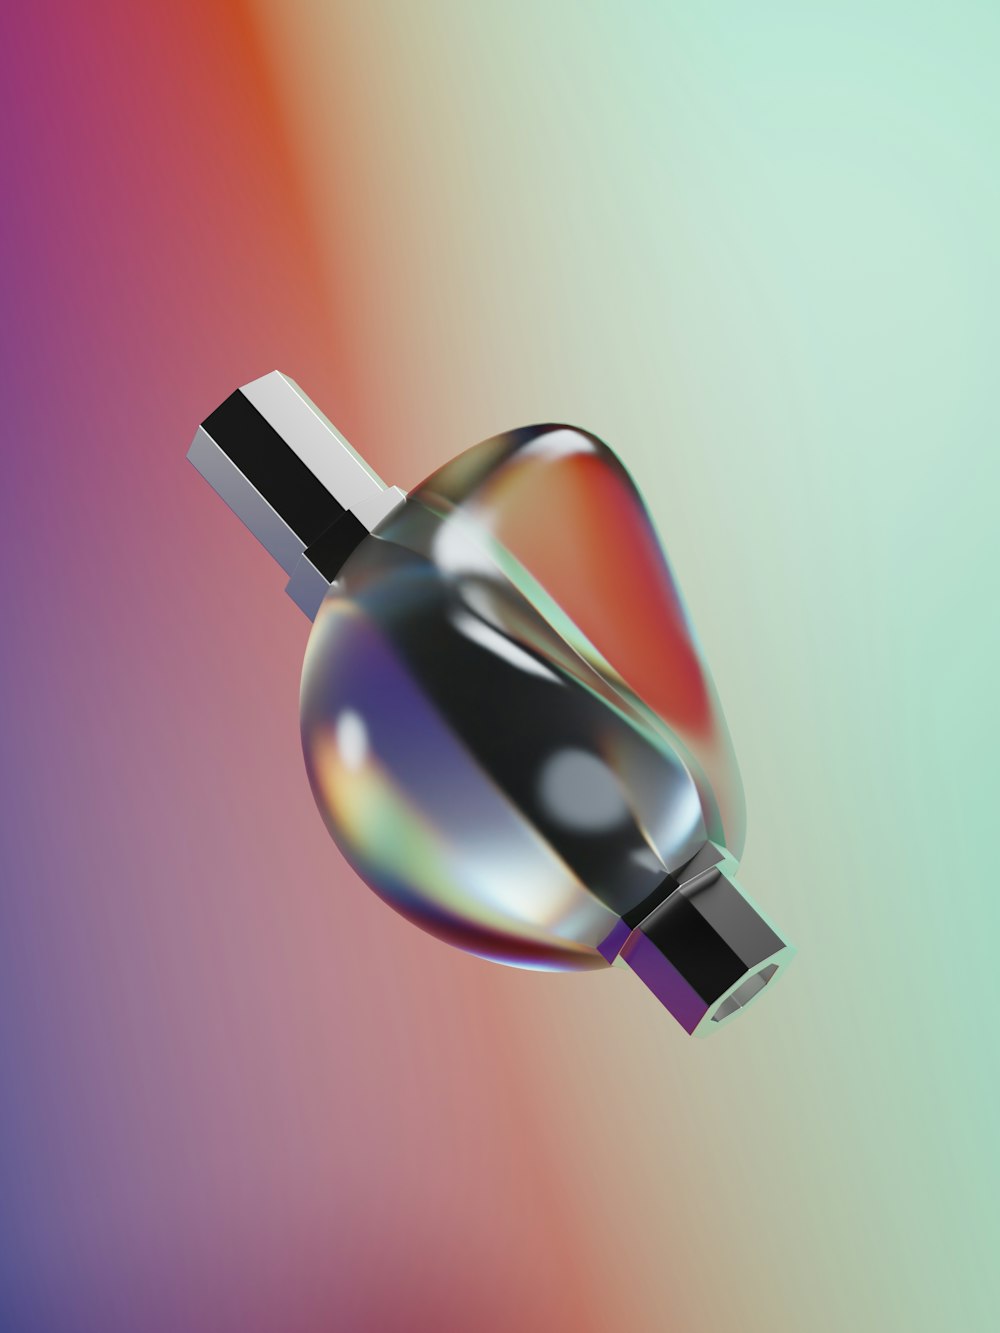 a close up of a glass object with a blurry background